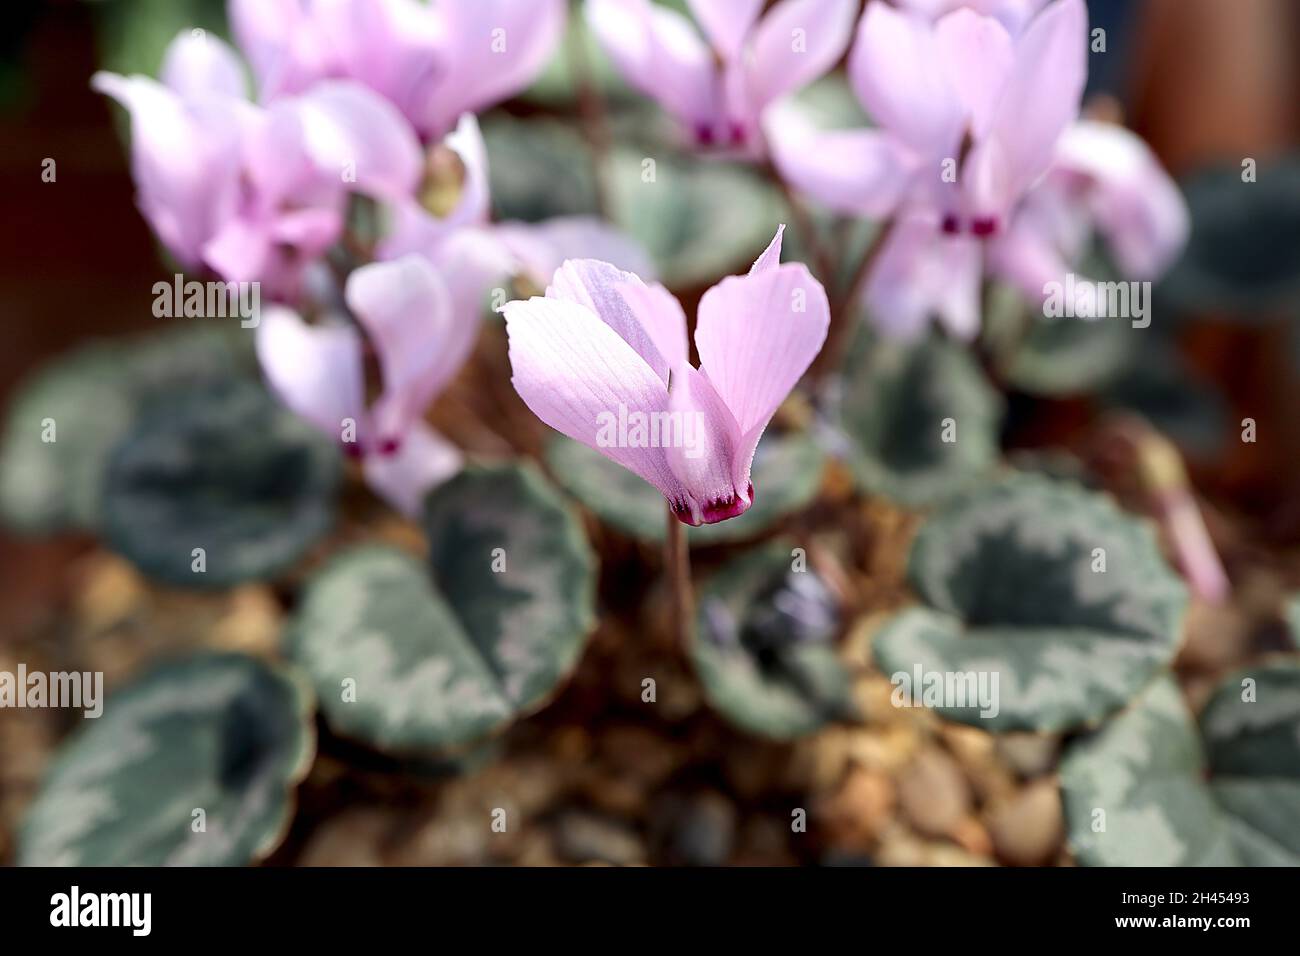 Cyclamen mirabile ‘Tilebarn Anne’ sowbread Tilebarn Anne - miniature pale pink flowers with fringed petals and crimson base, patterned leaves, Stock Photo